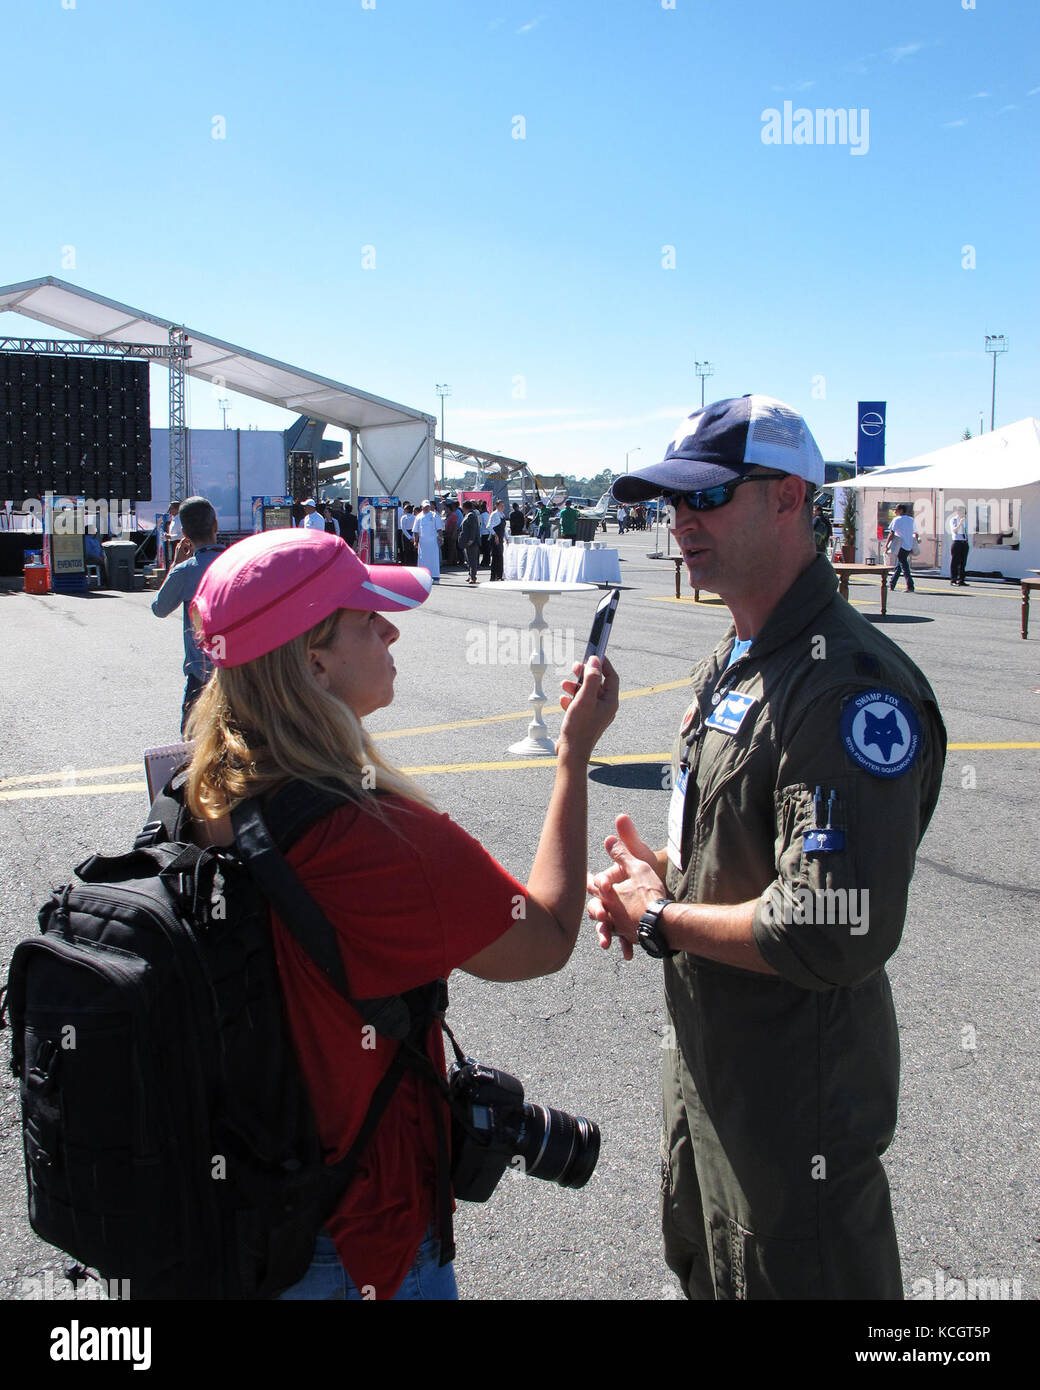 Geraldine Cook (left), journalist with U.S. Southern Command’s Dialogo Digital Military Magazine, interviews U.S. Air Force Lt. Col. Jeff Beckham, an F-16 pilot with the South Carolina Air National Guard’s 169th Fighter Wing before the start of Colombian Air Force’s Feria Aeronautica Internaccional – Colombia in Rionegro, Colombia, July 13, 2017. The United States Air Force is participating in the four-day air show with two South Carolina Air National Guard F-16s as static displays, plus static displays of a KC-135, KC-10, along with an aerial demonstration by the Air Combat Command’s Viper Ea Stock Photo